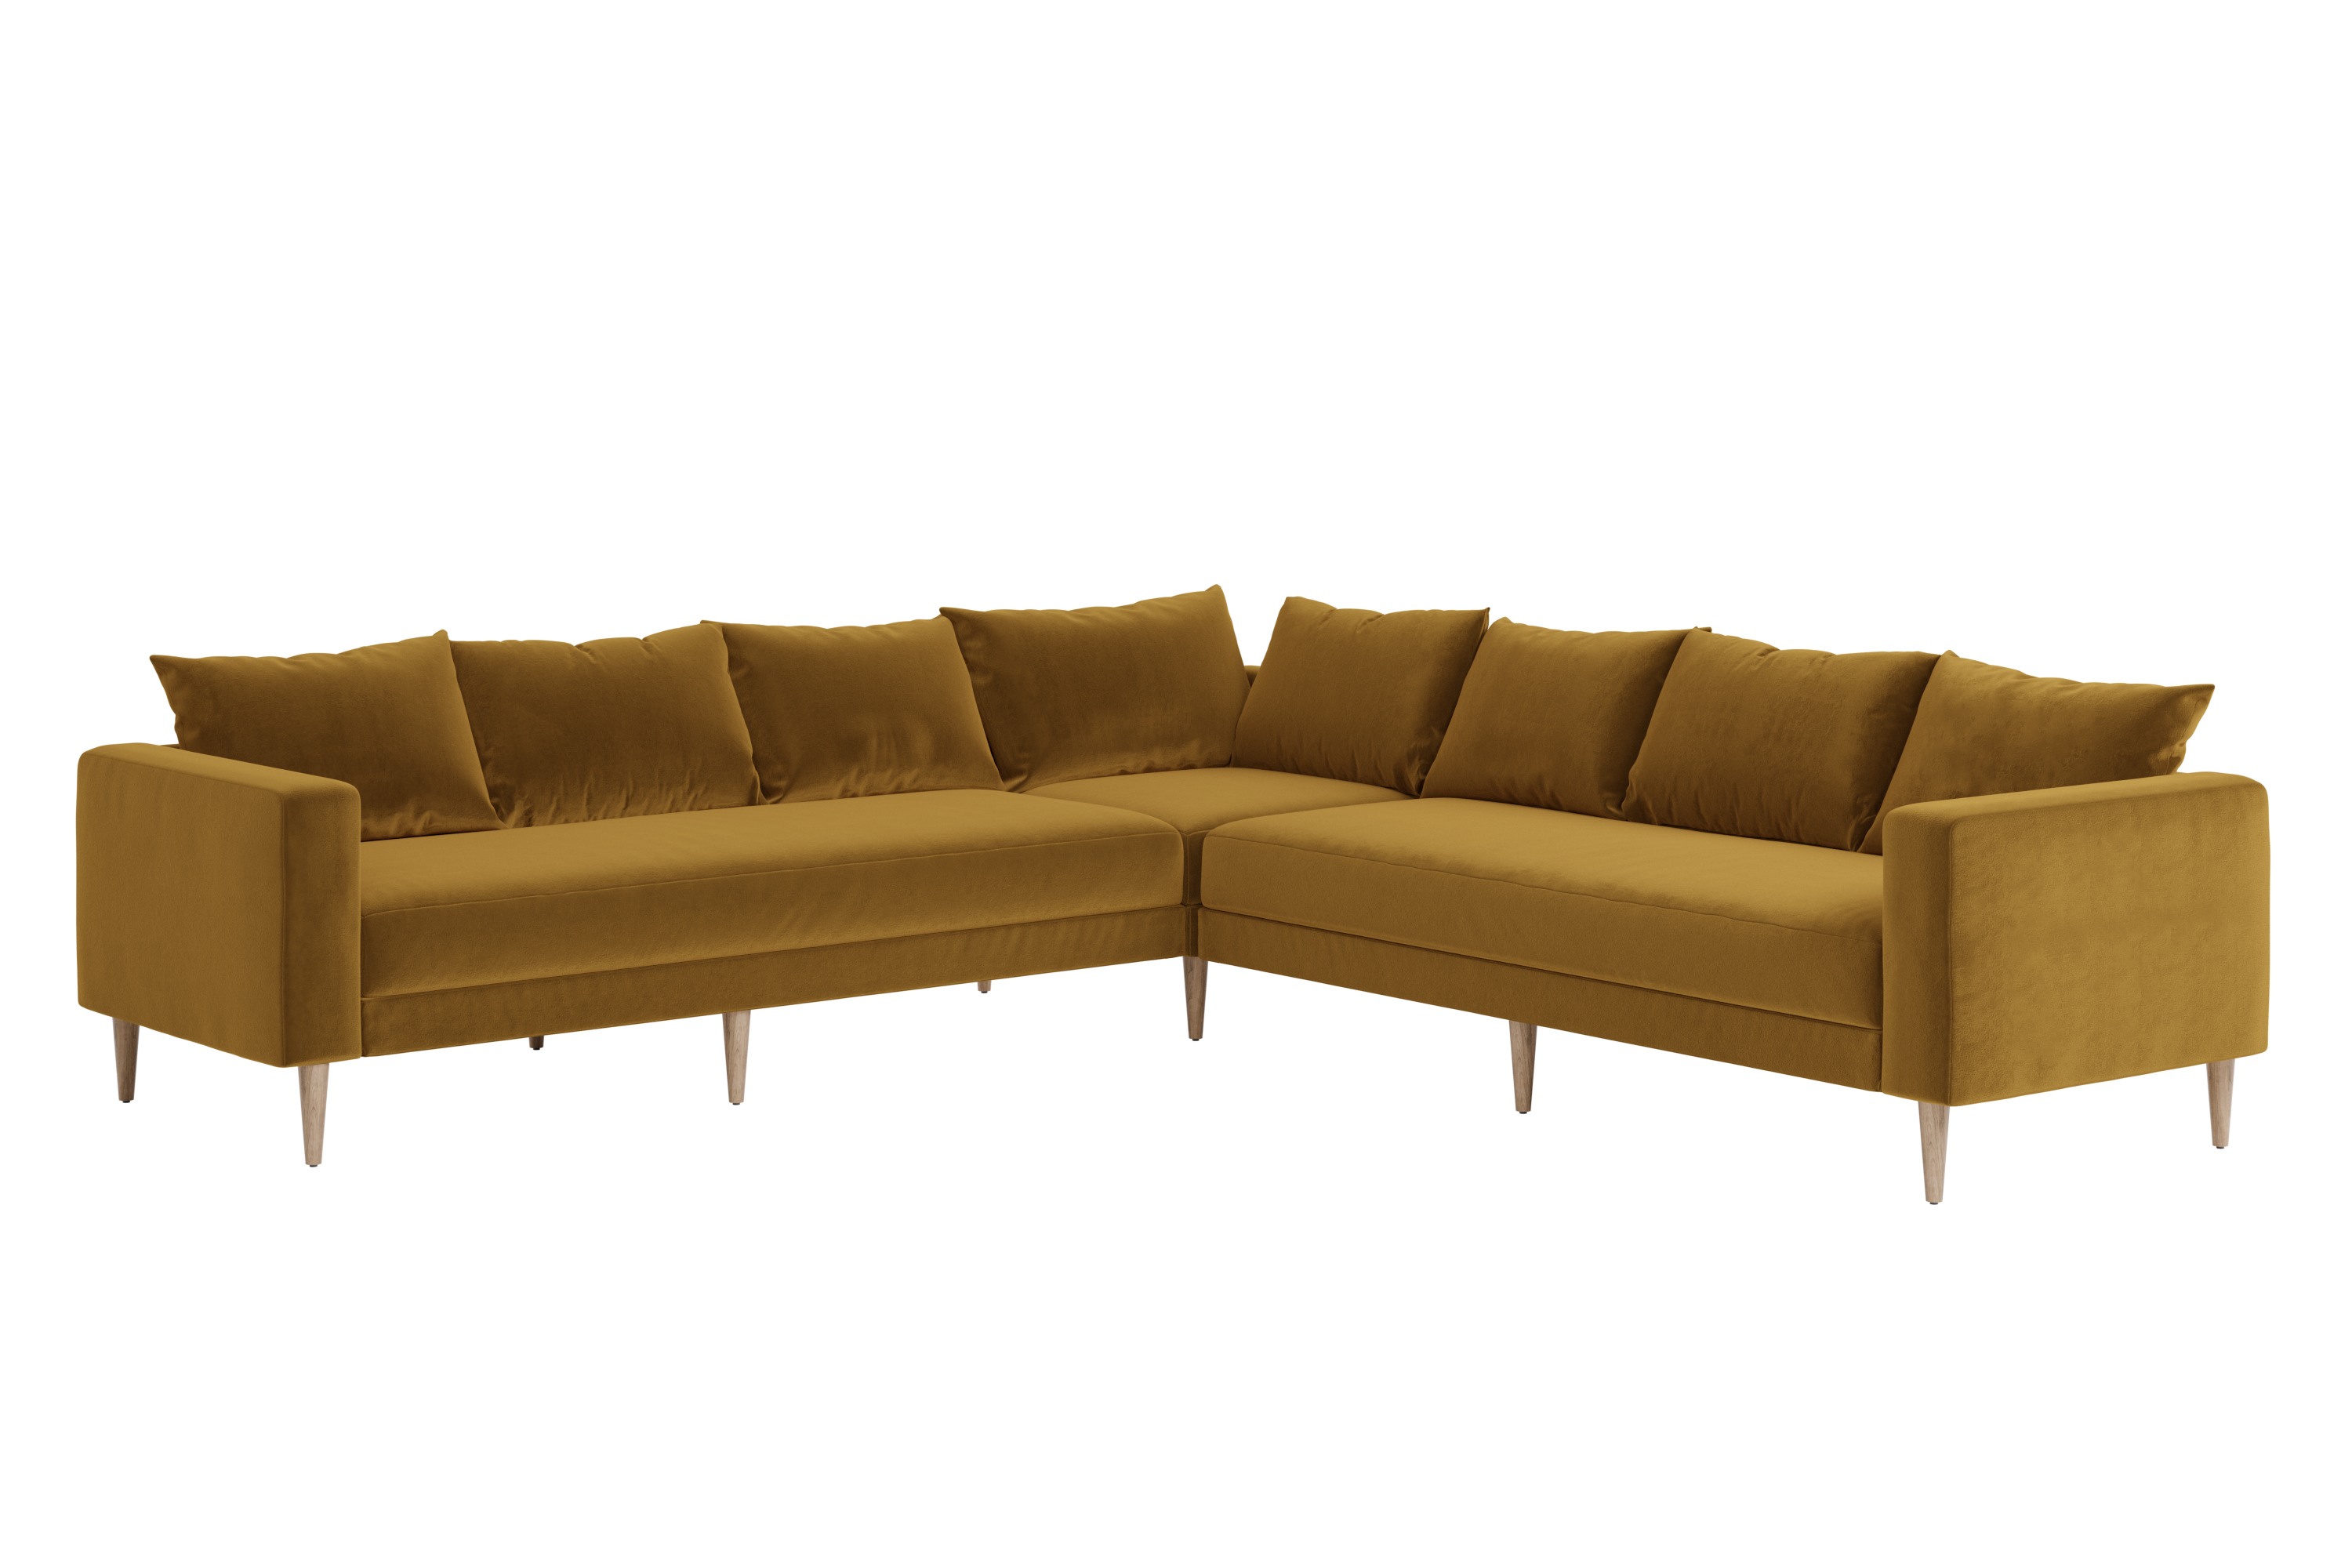 The Essential Corner Sectional (7 Seat) in Upcycled Poly